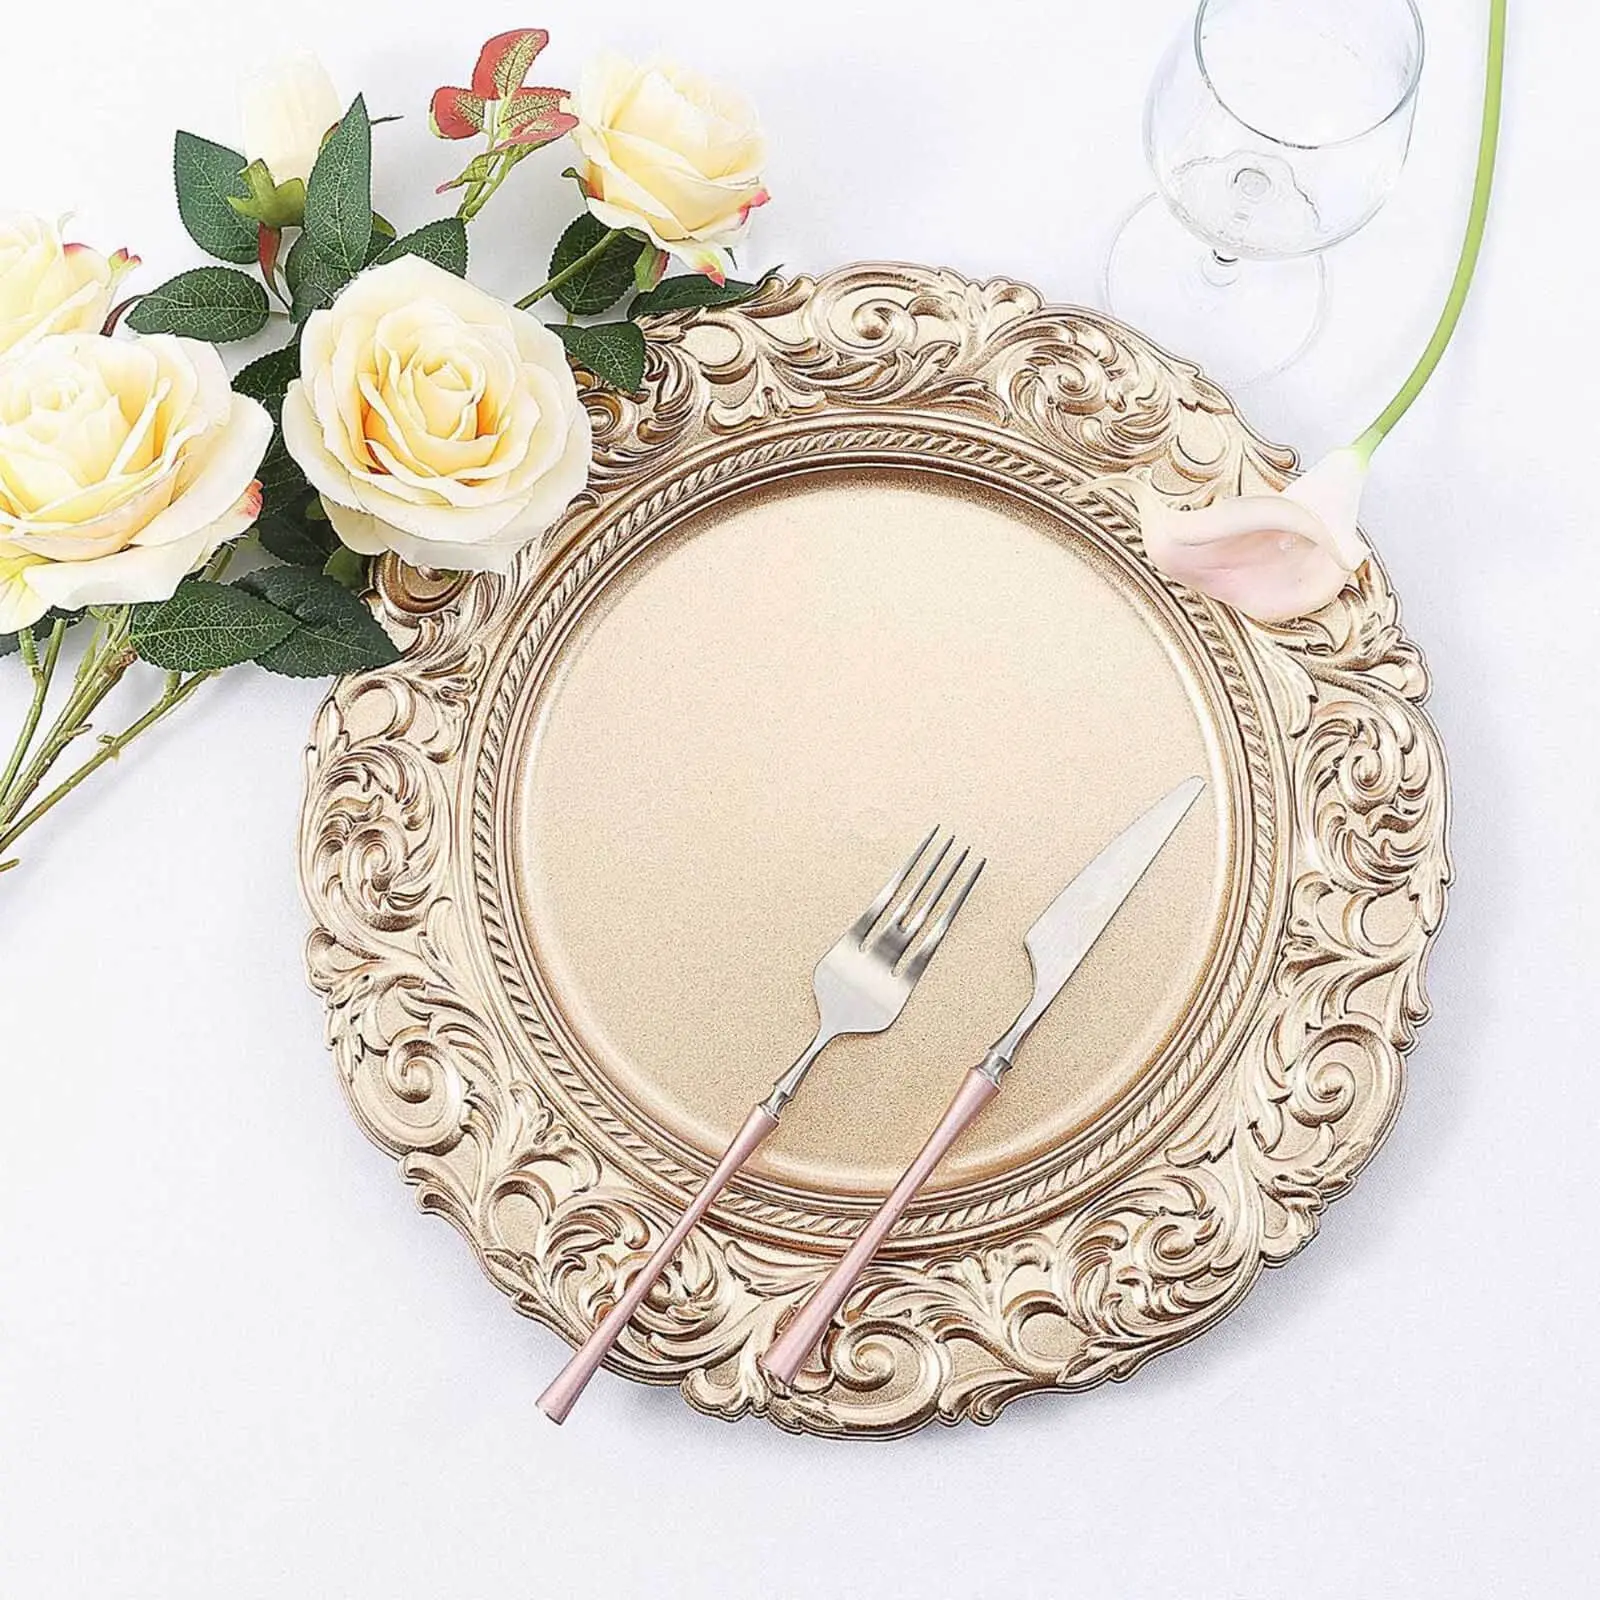 Wholesale 12 Inch Gold Round Wedding Party Decoration Metallic Cheap Plastic Charger Plates Charger Plate For Table Decorations